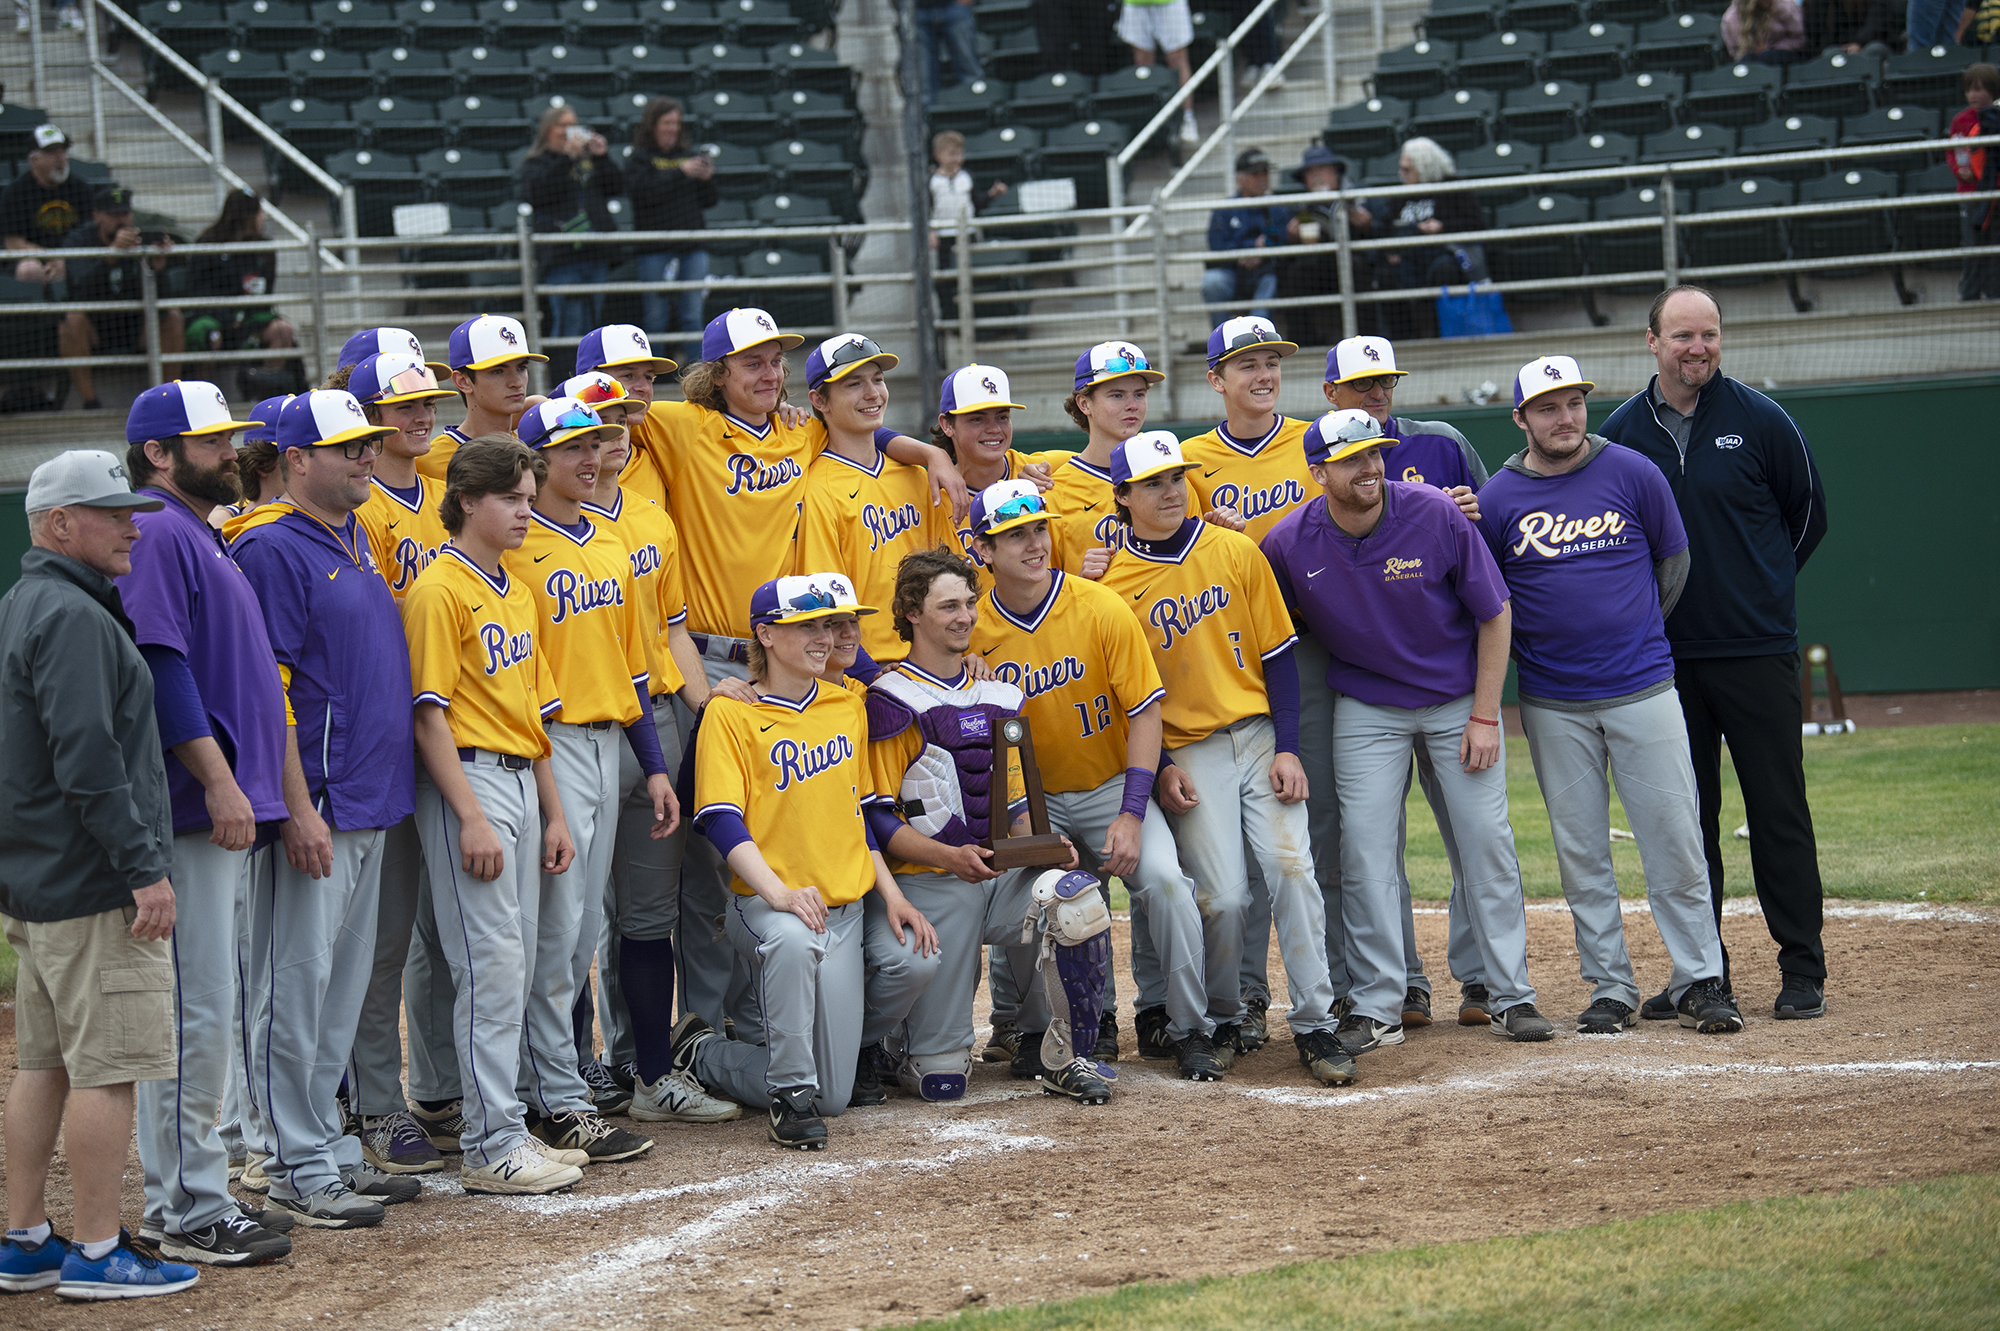 The Columbia River baseball team poses with the second place trophy after the Rapids' 1-0 loss to Tumwater in the Class 2A state championship baseball team in Yakima on Saturday, May 28, 2022.